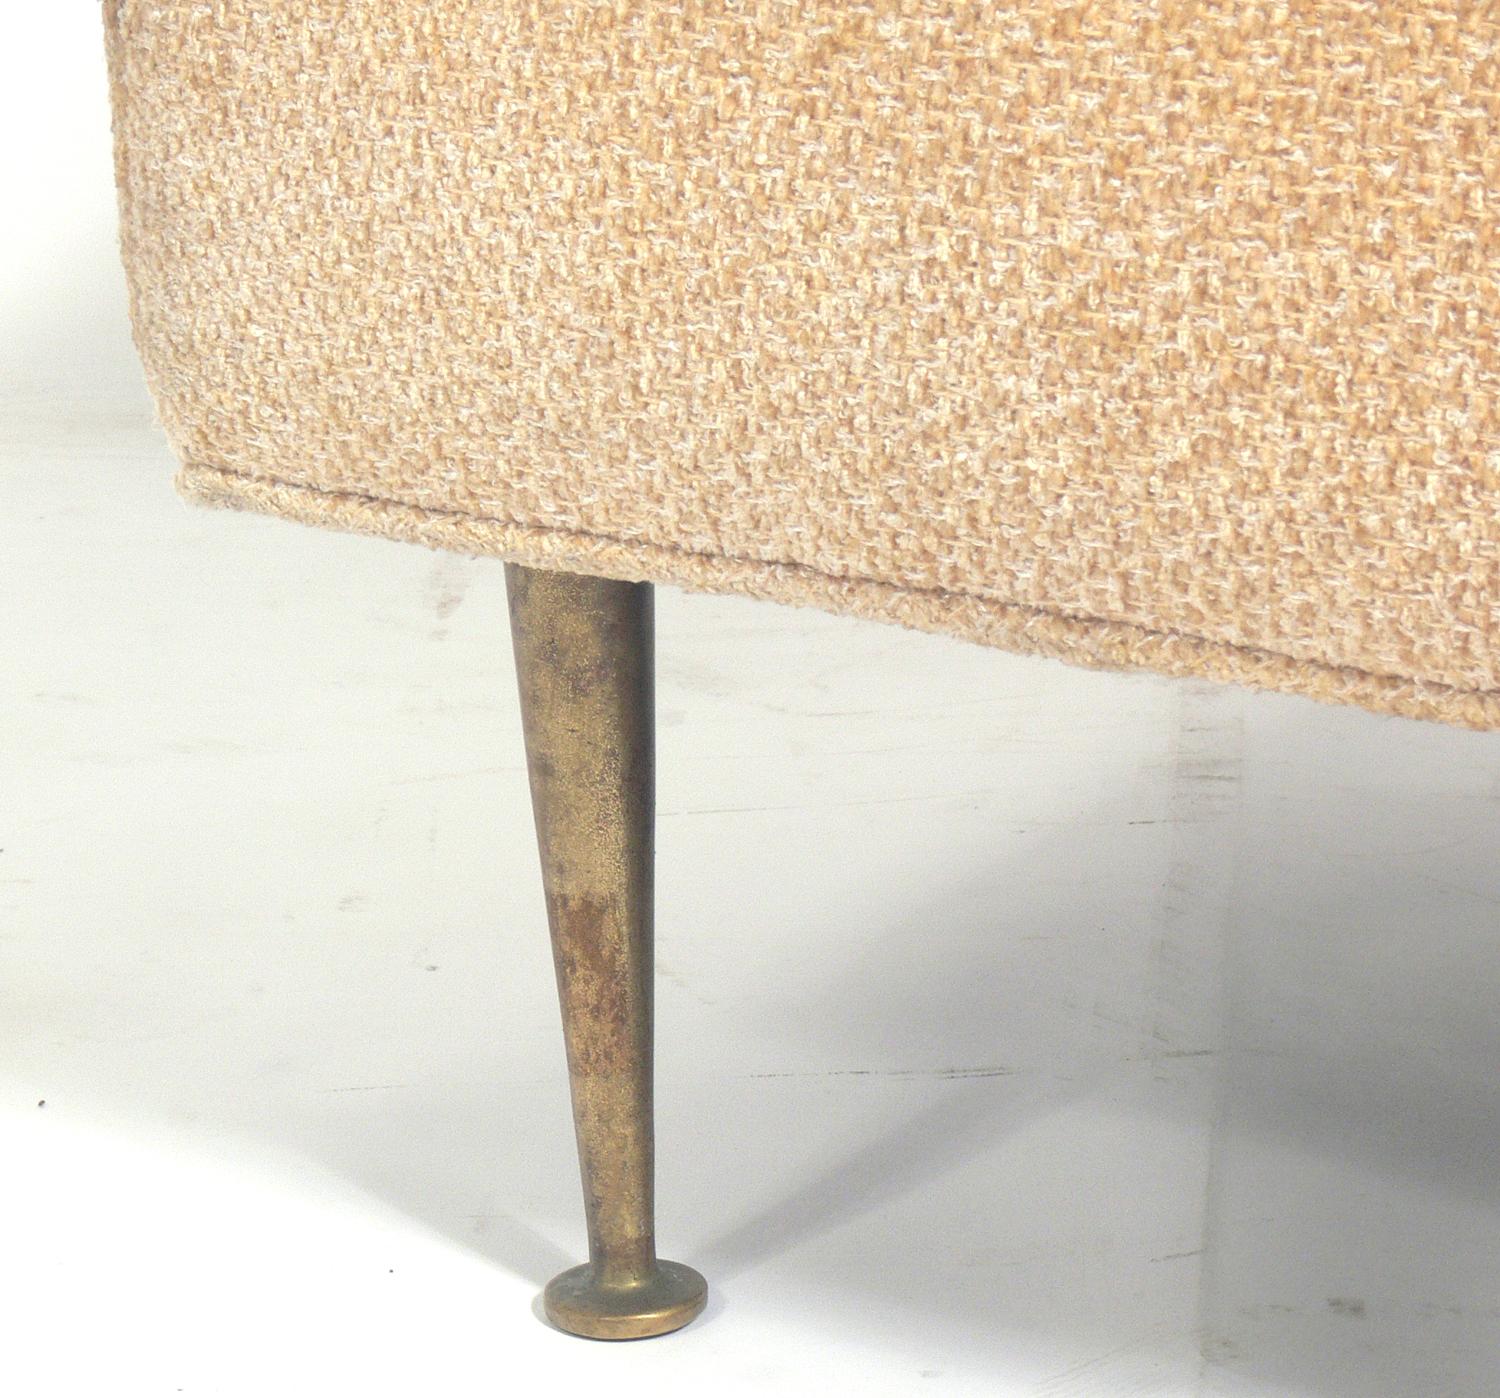 American Modern Stool or Bench Attributed to T.H. Robsjohn-Gibbings For Sale